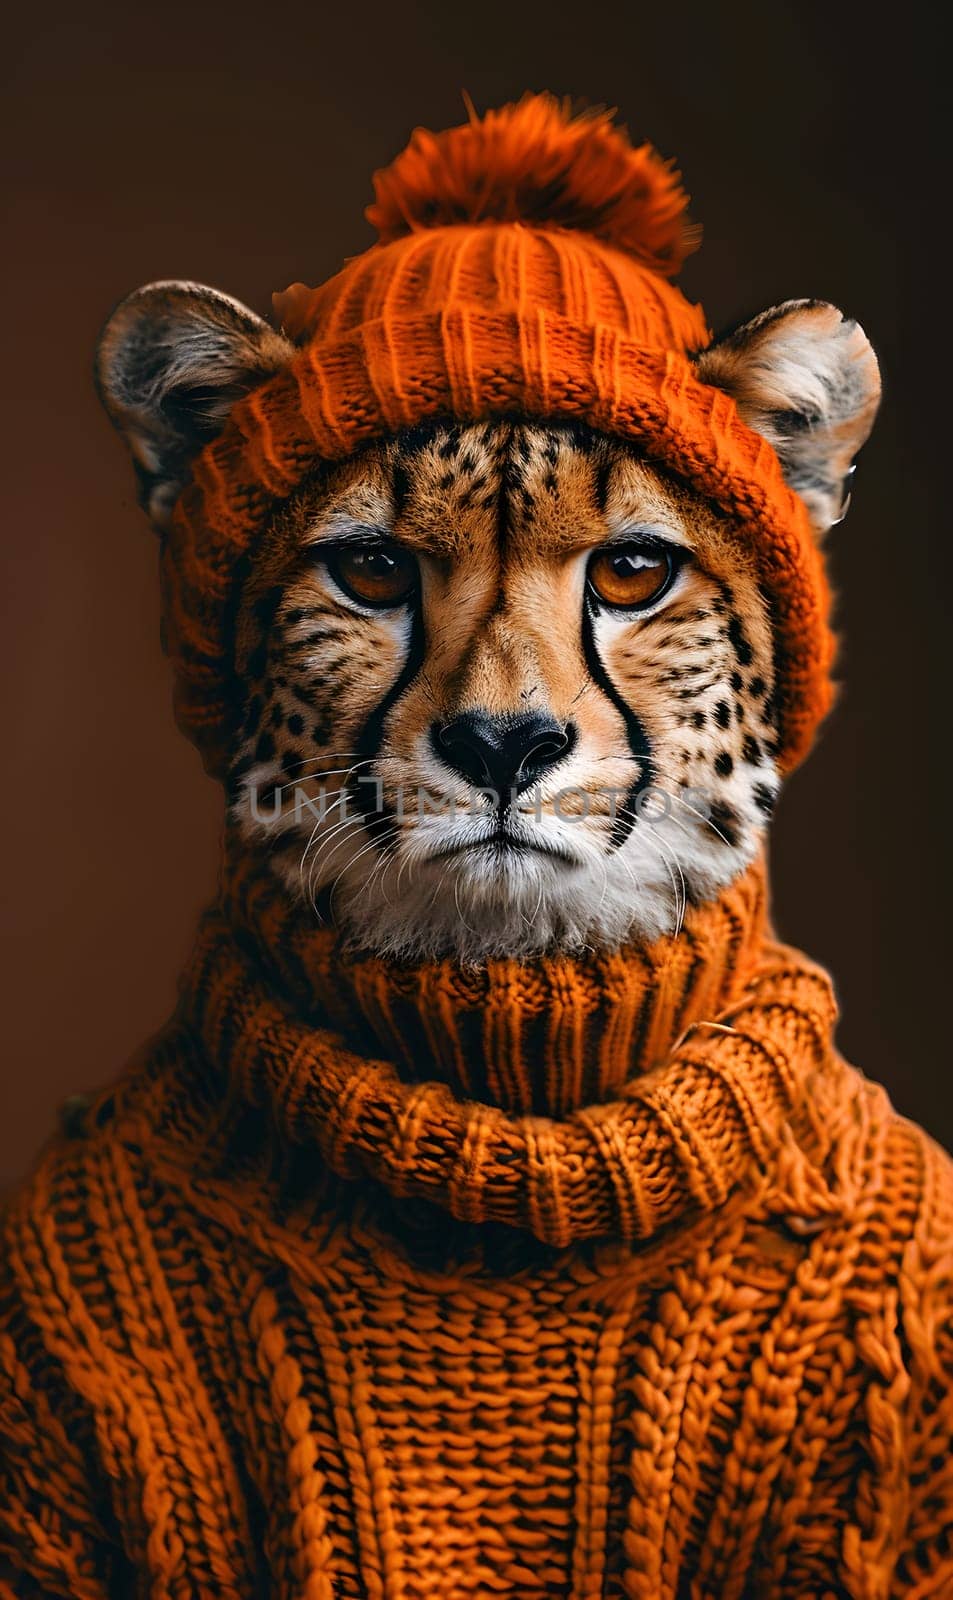 A Felidae with stripes resembling a Bengal tiger dons an orange hat and sweater by Nadtochiy